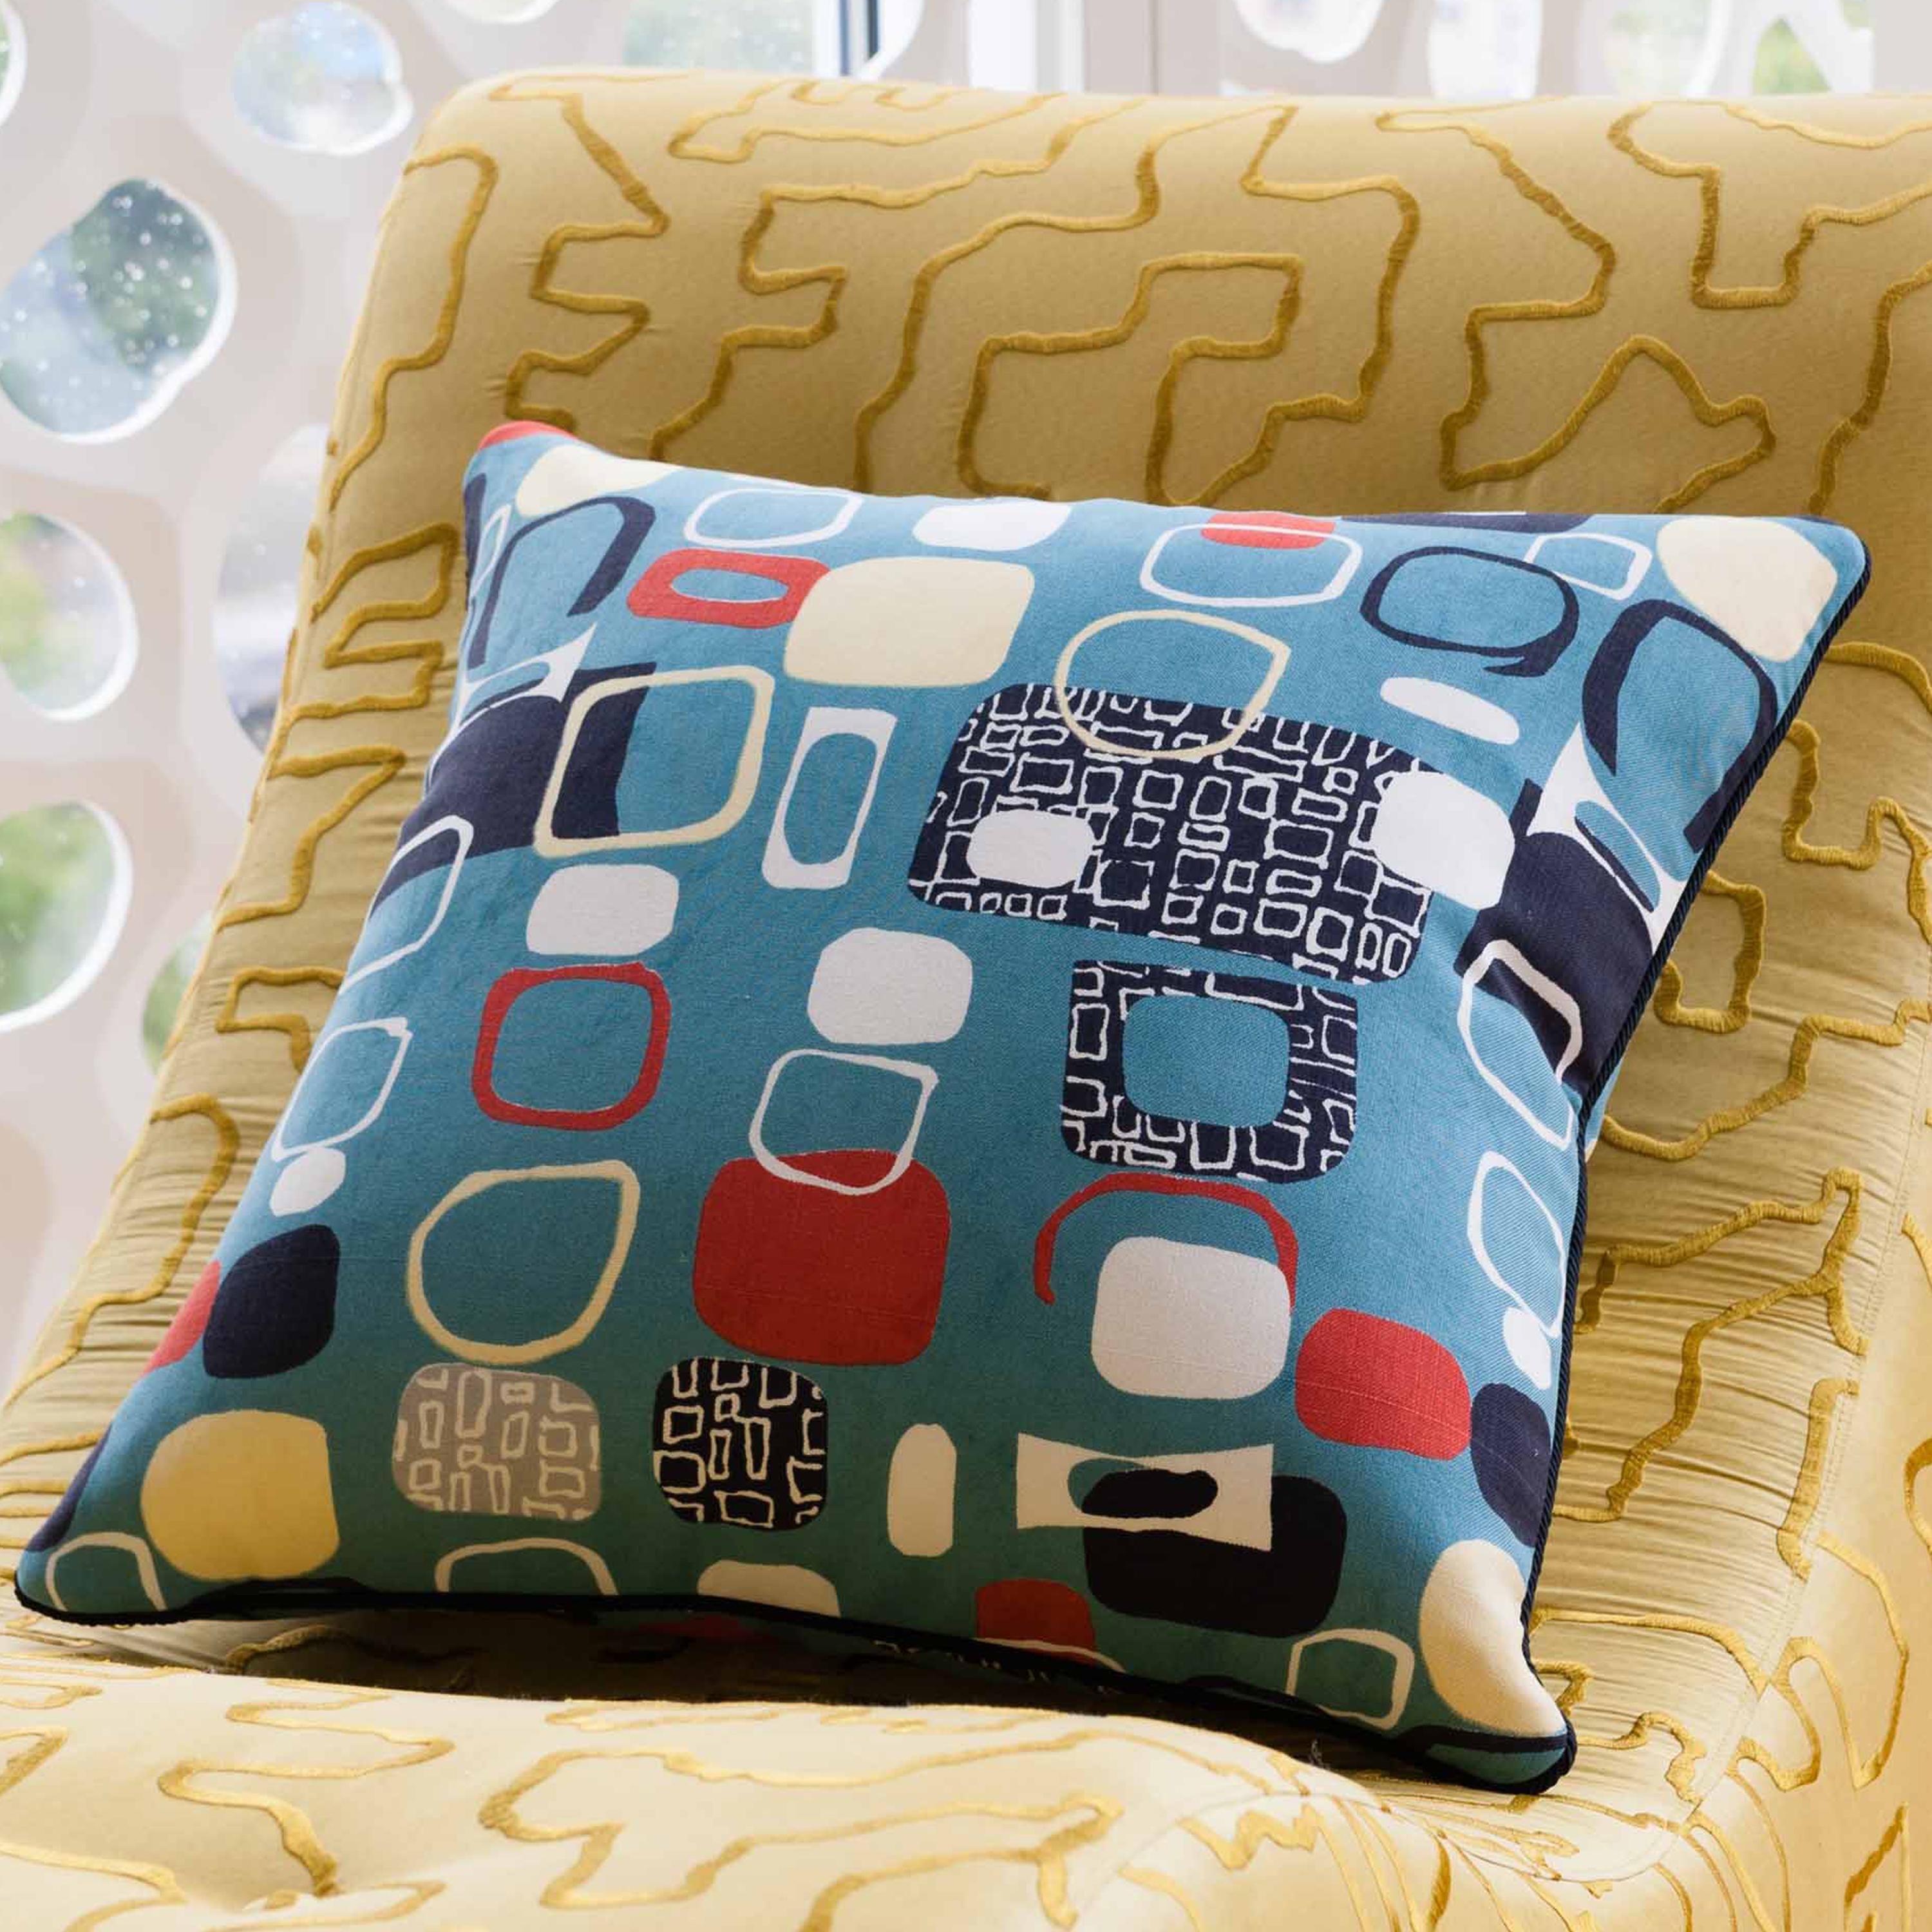 Hand-Crafted Vintage Cushions Bespoke Pillow 'Pebbles' Fabric by Designer Jacqueline Groag